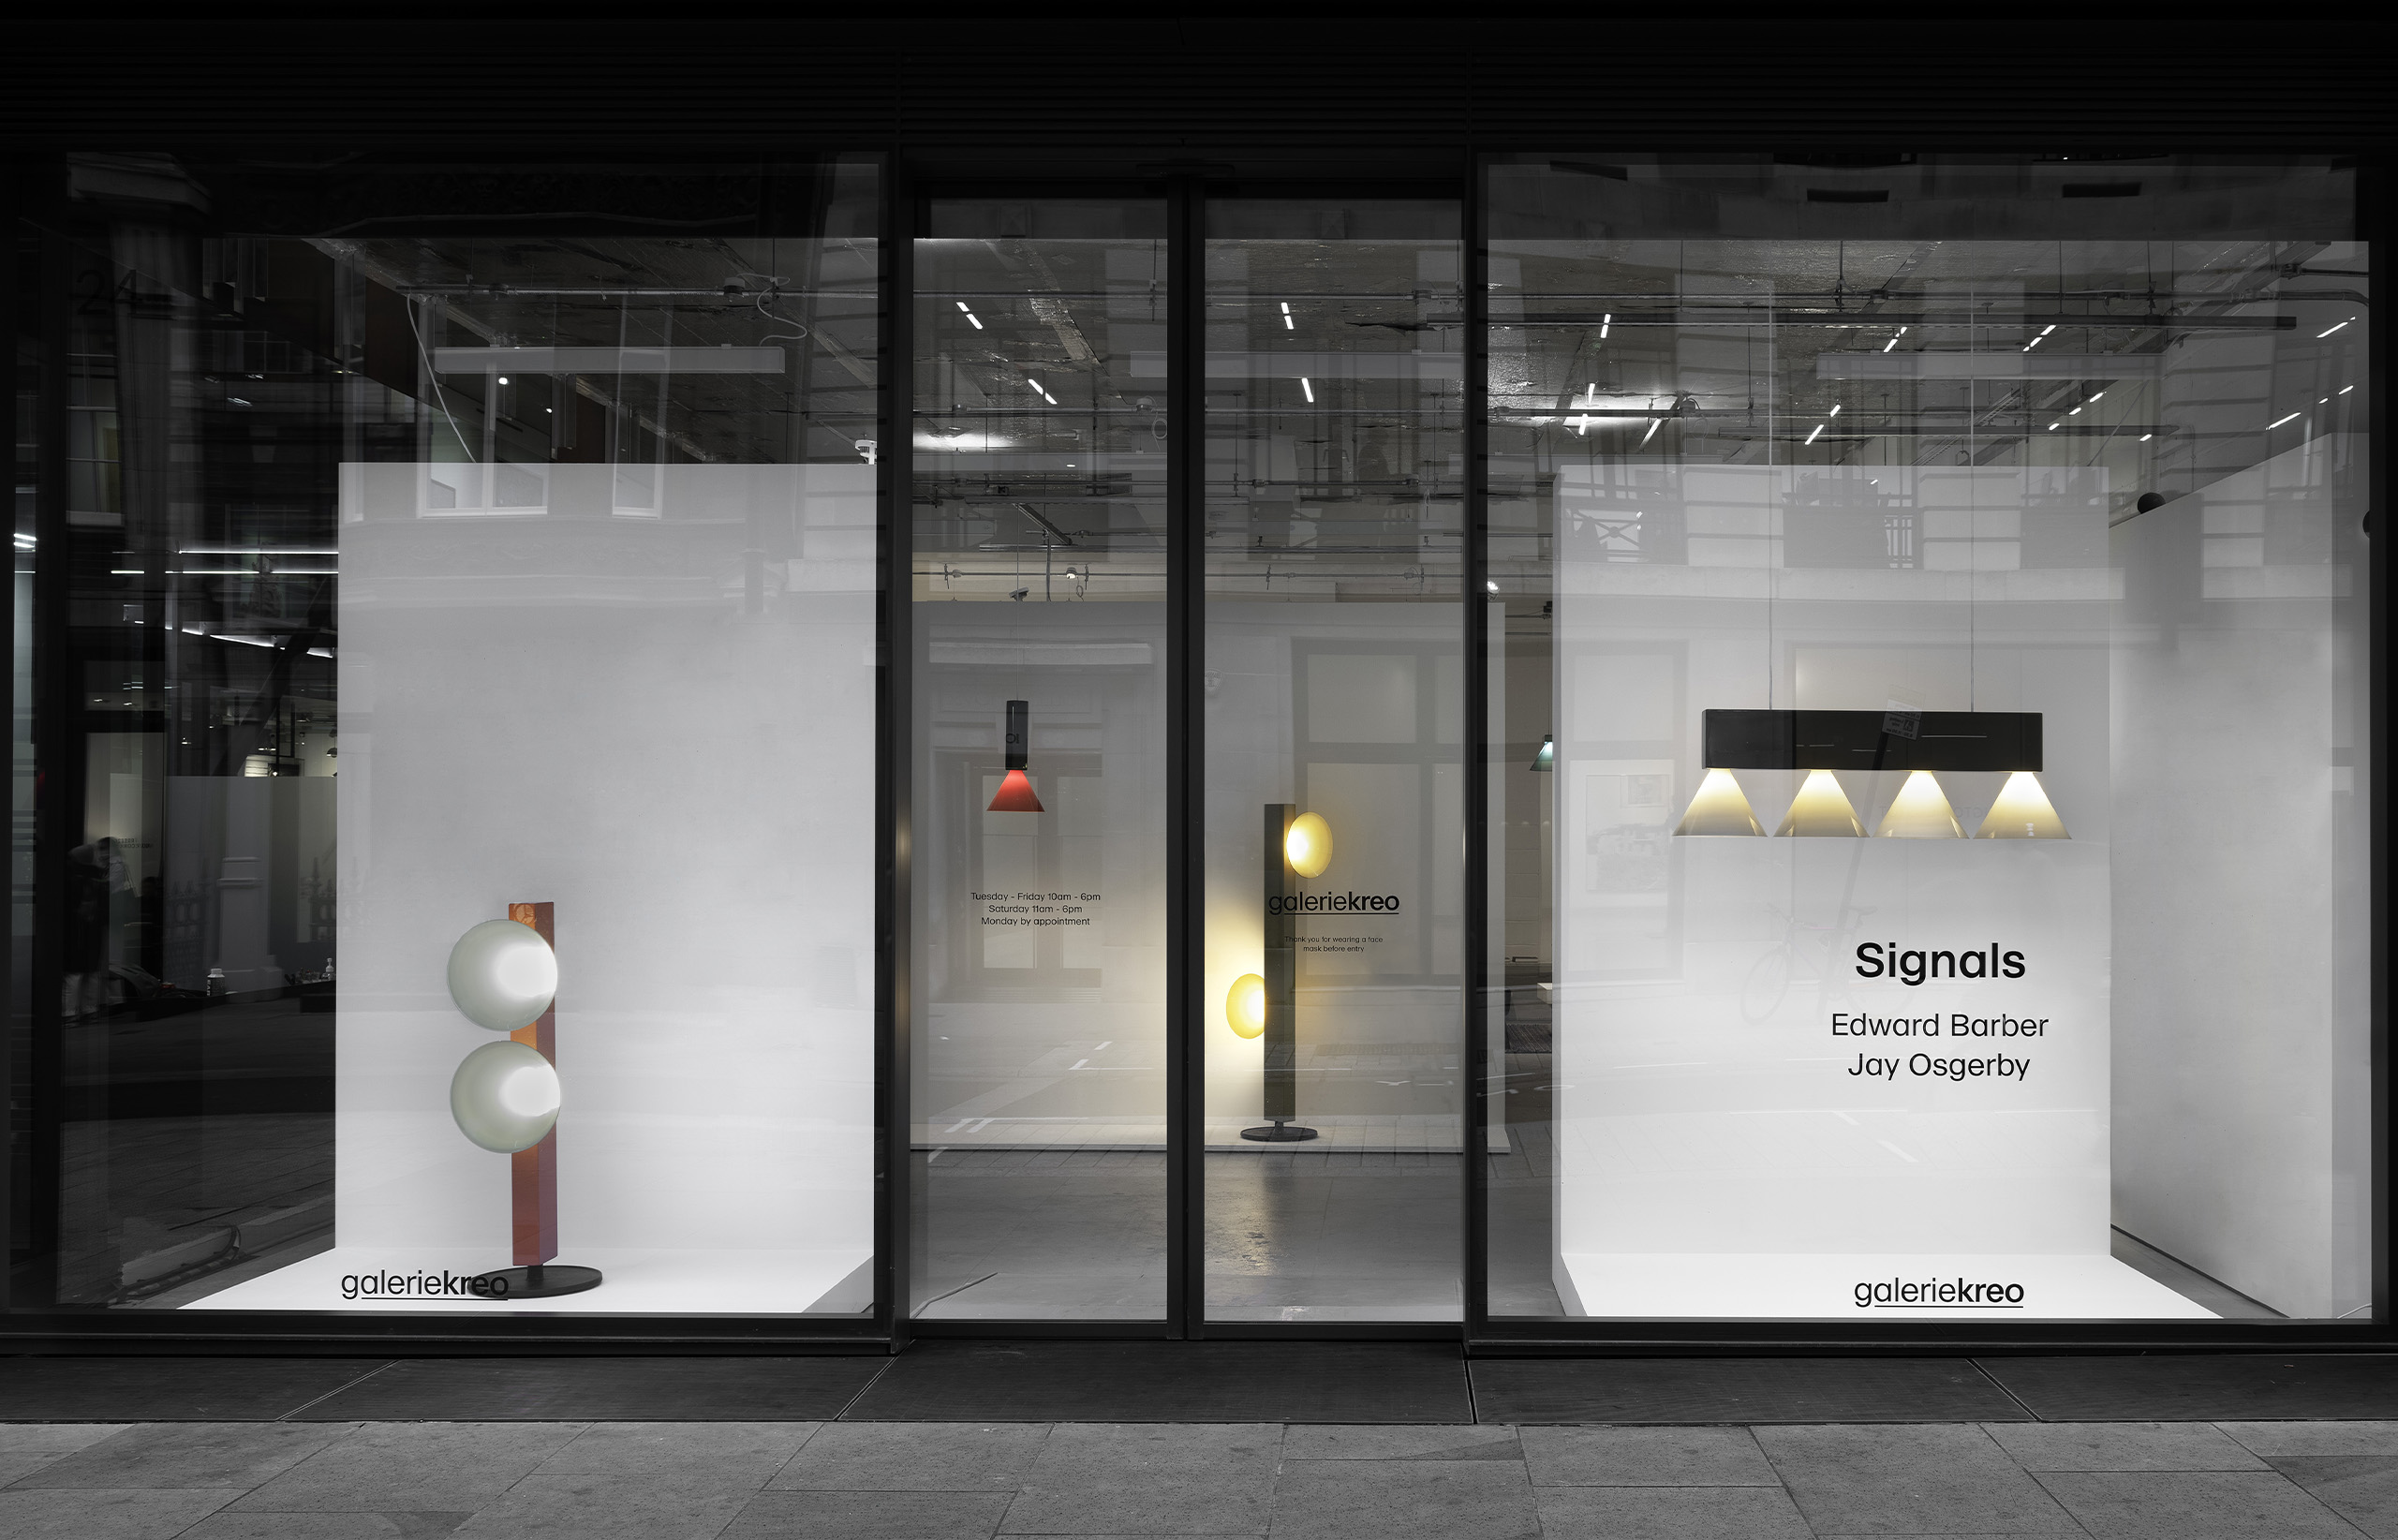 Signals by Edward Barber and Jay Osgerby at Galerie kreo